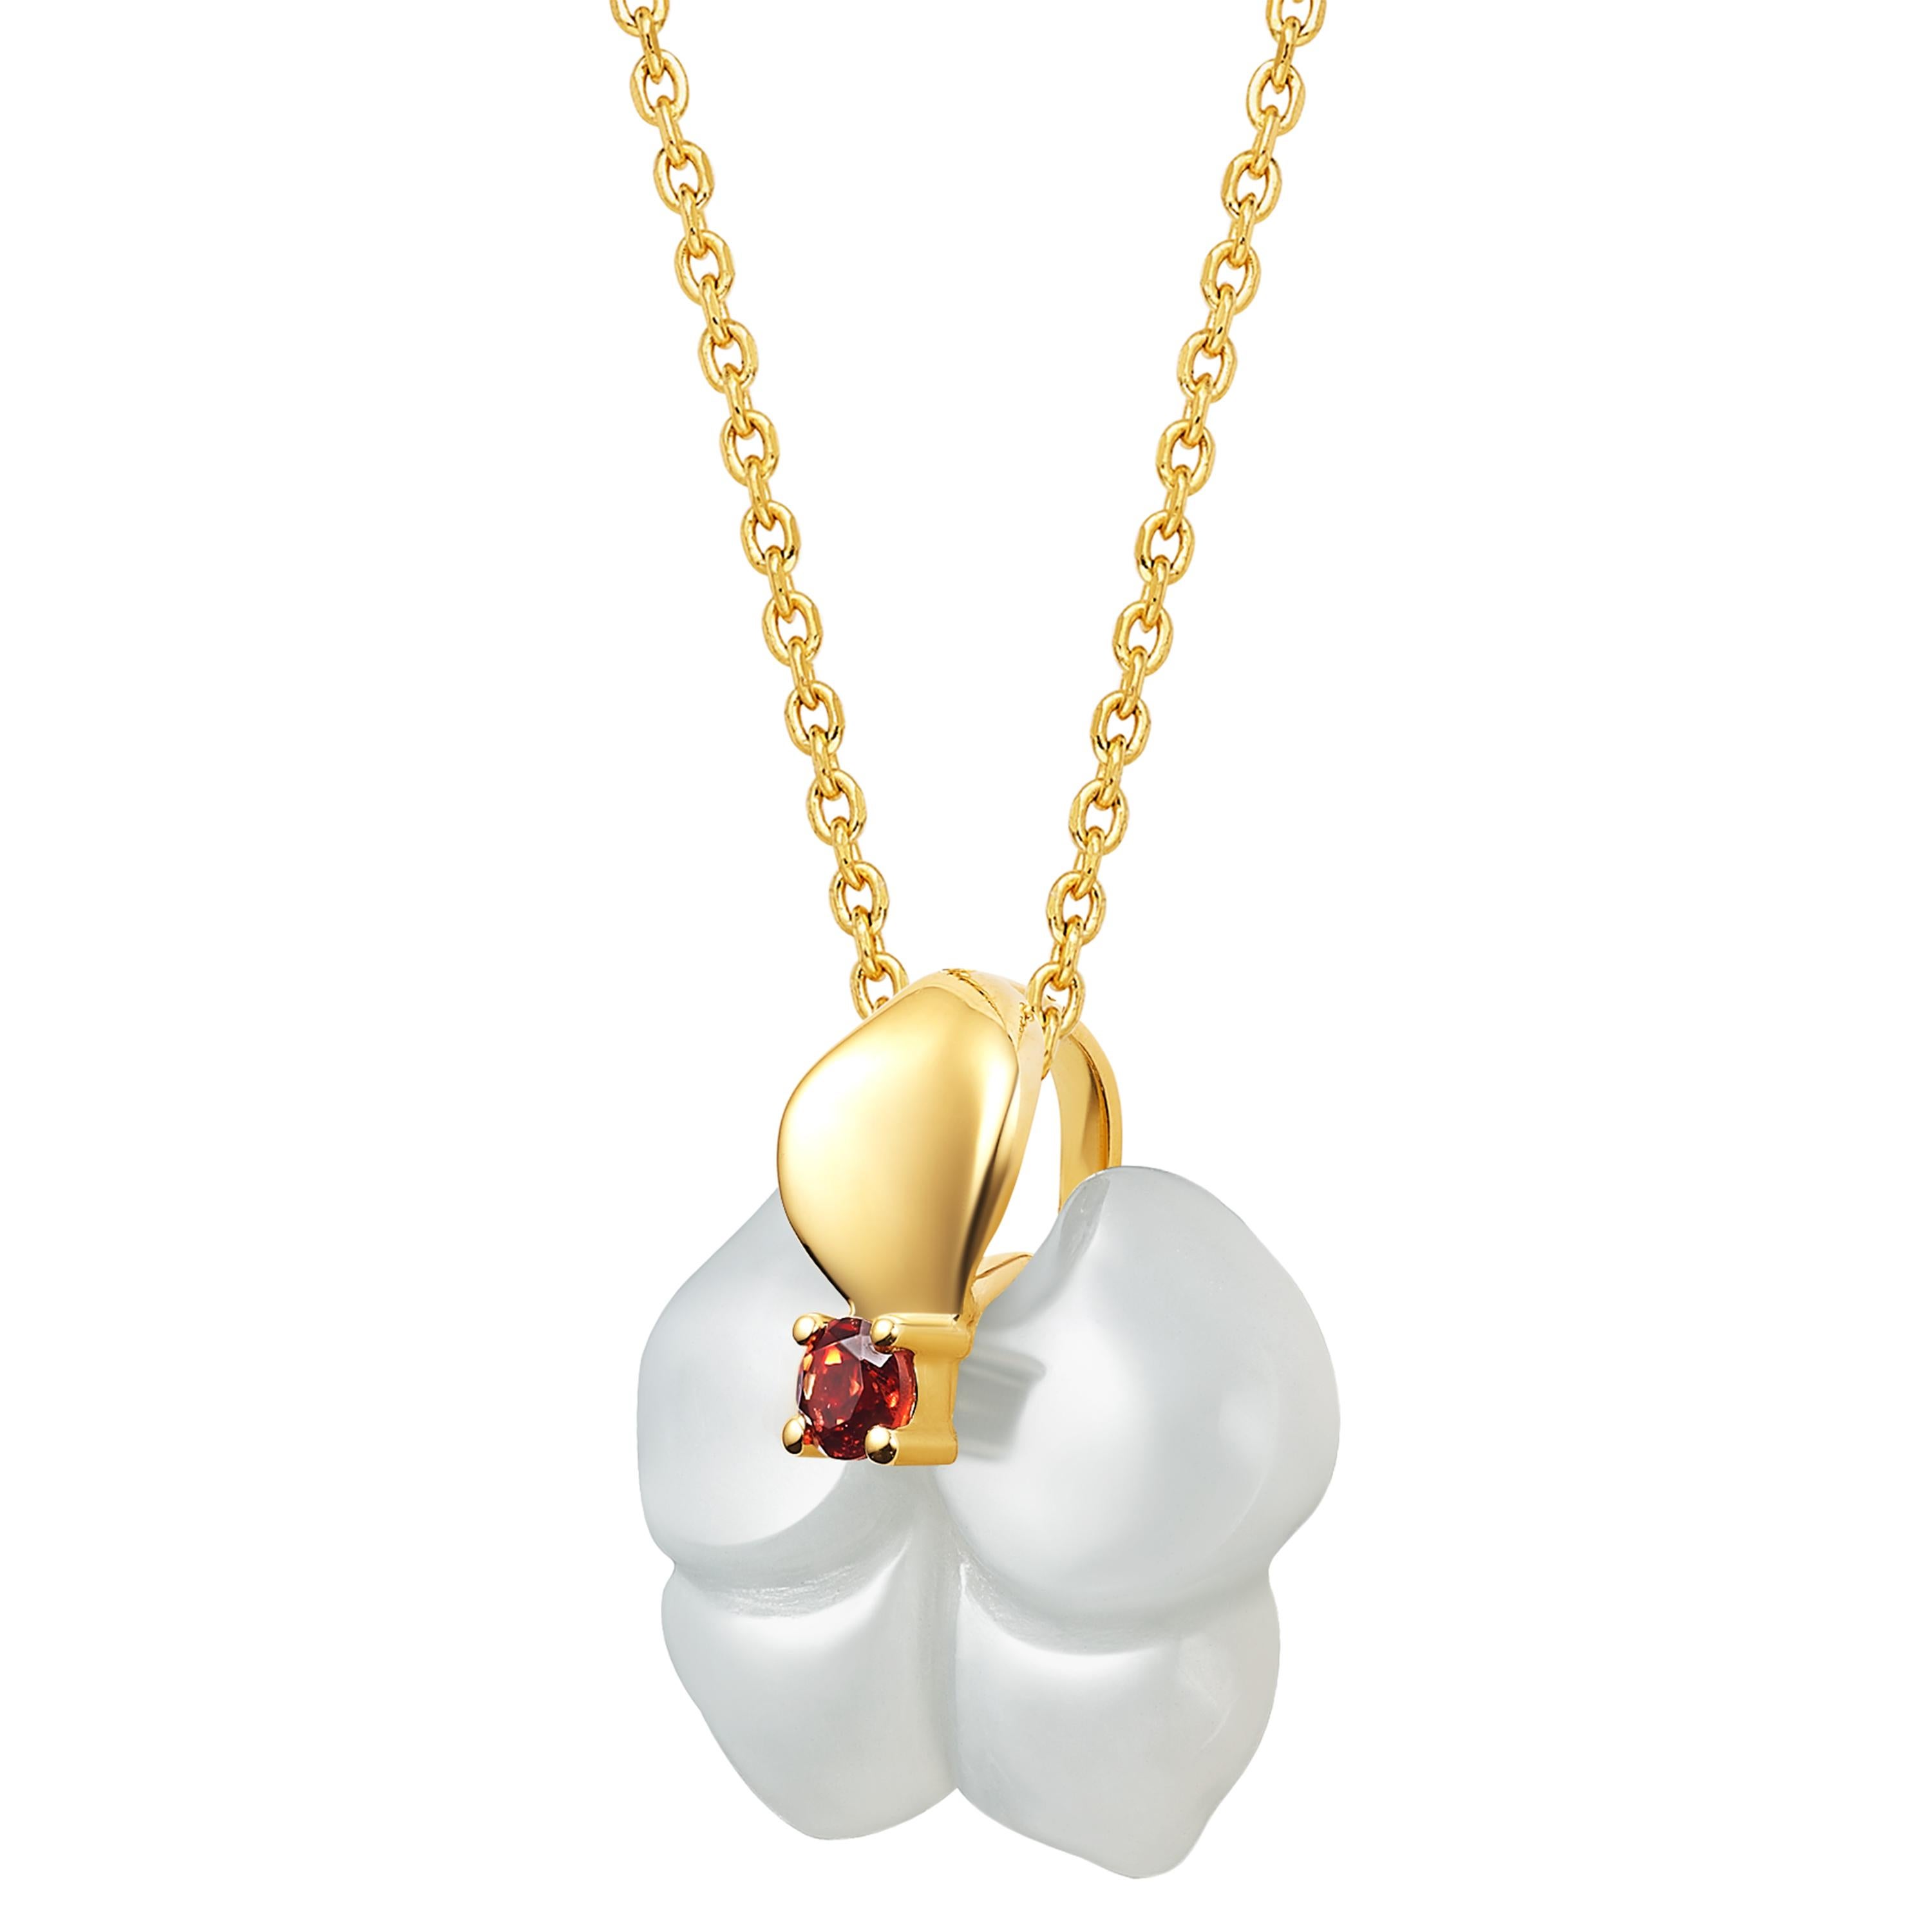 Description:
Orchid necklace with orchid carved Russian nephrite and red garnet, set in 14ct yellow gold.

Note, the chain is 14ct gold plate on sterling silver.

Inspiration:
A collection inspired by the exotic orchid flowers. White orchids serve